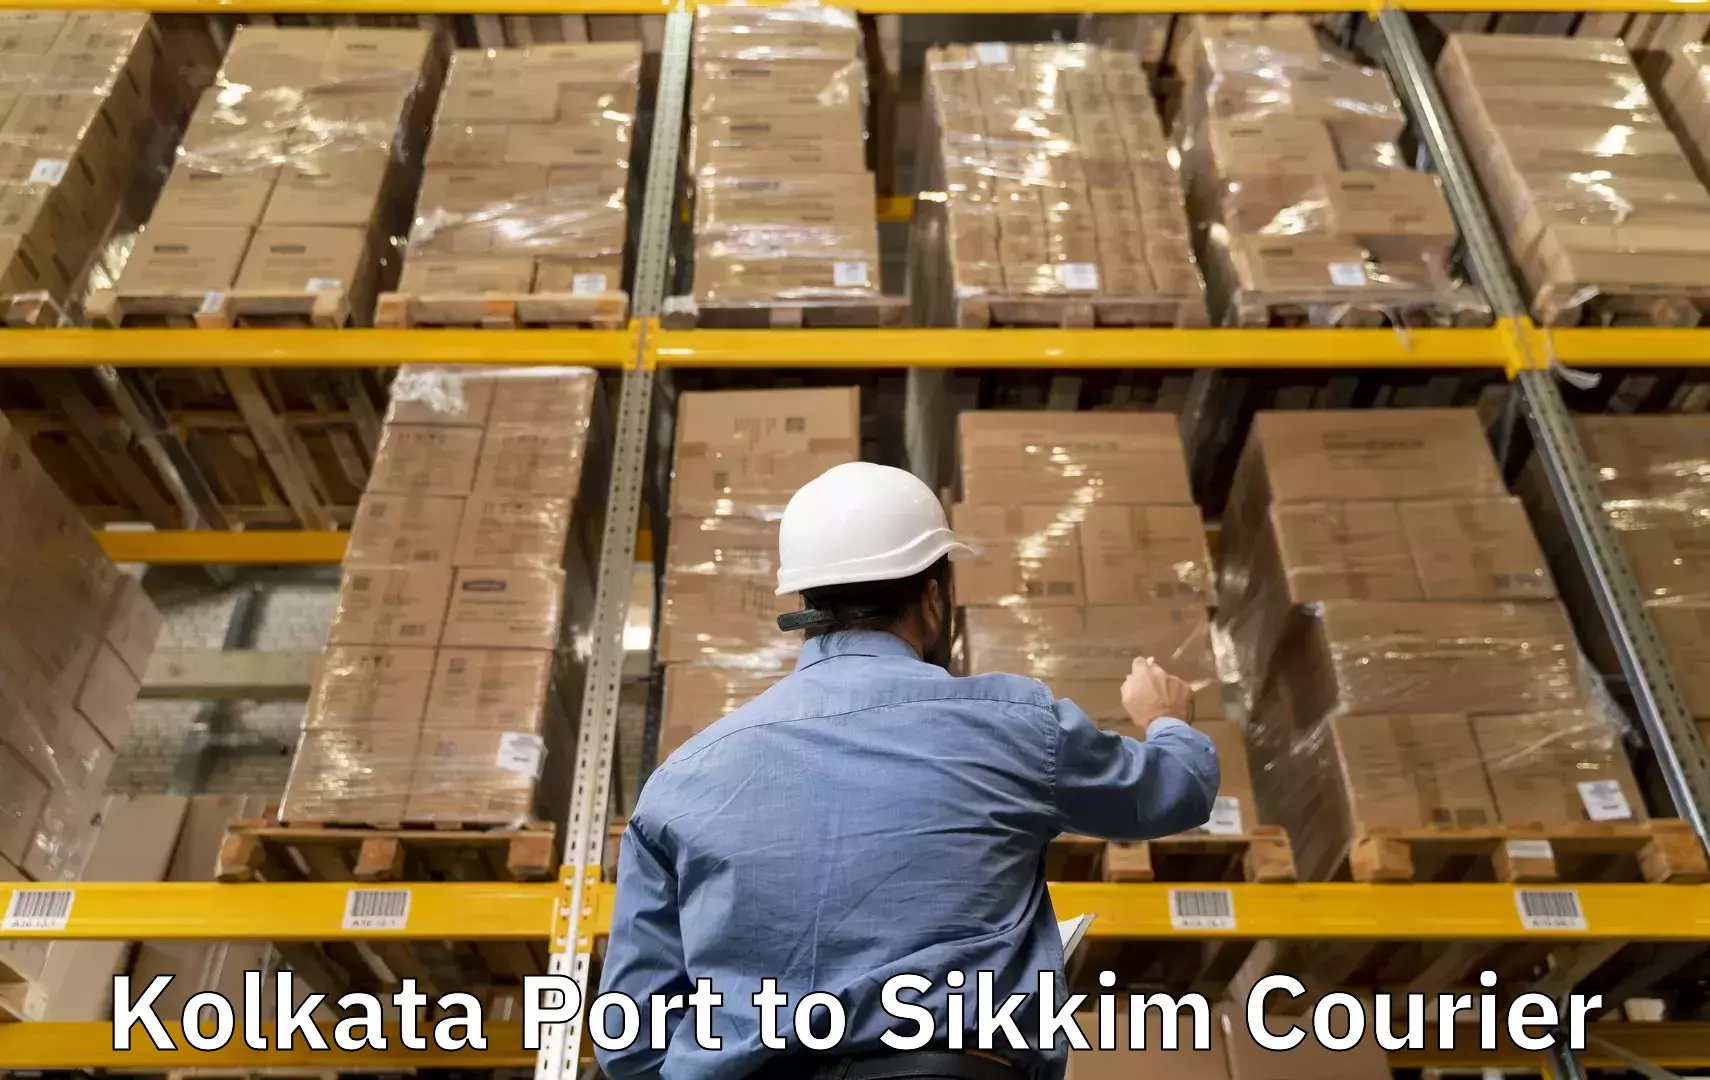 Baggage delivery technology Kolkata Port to South Sikkim